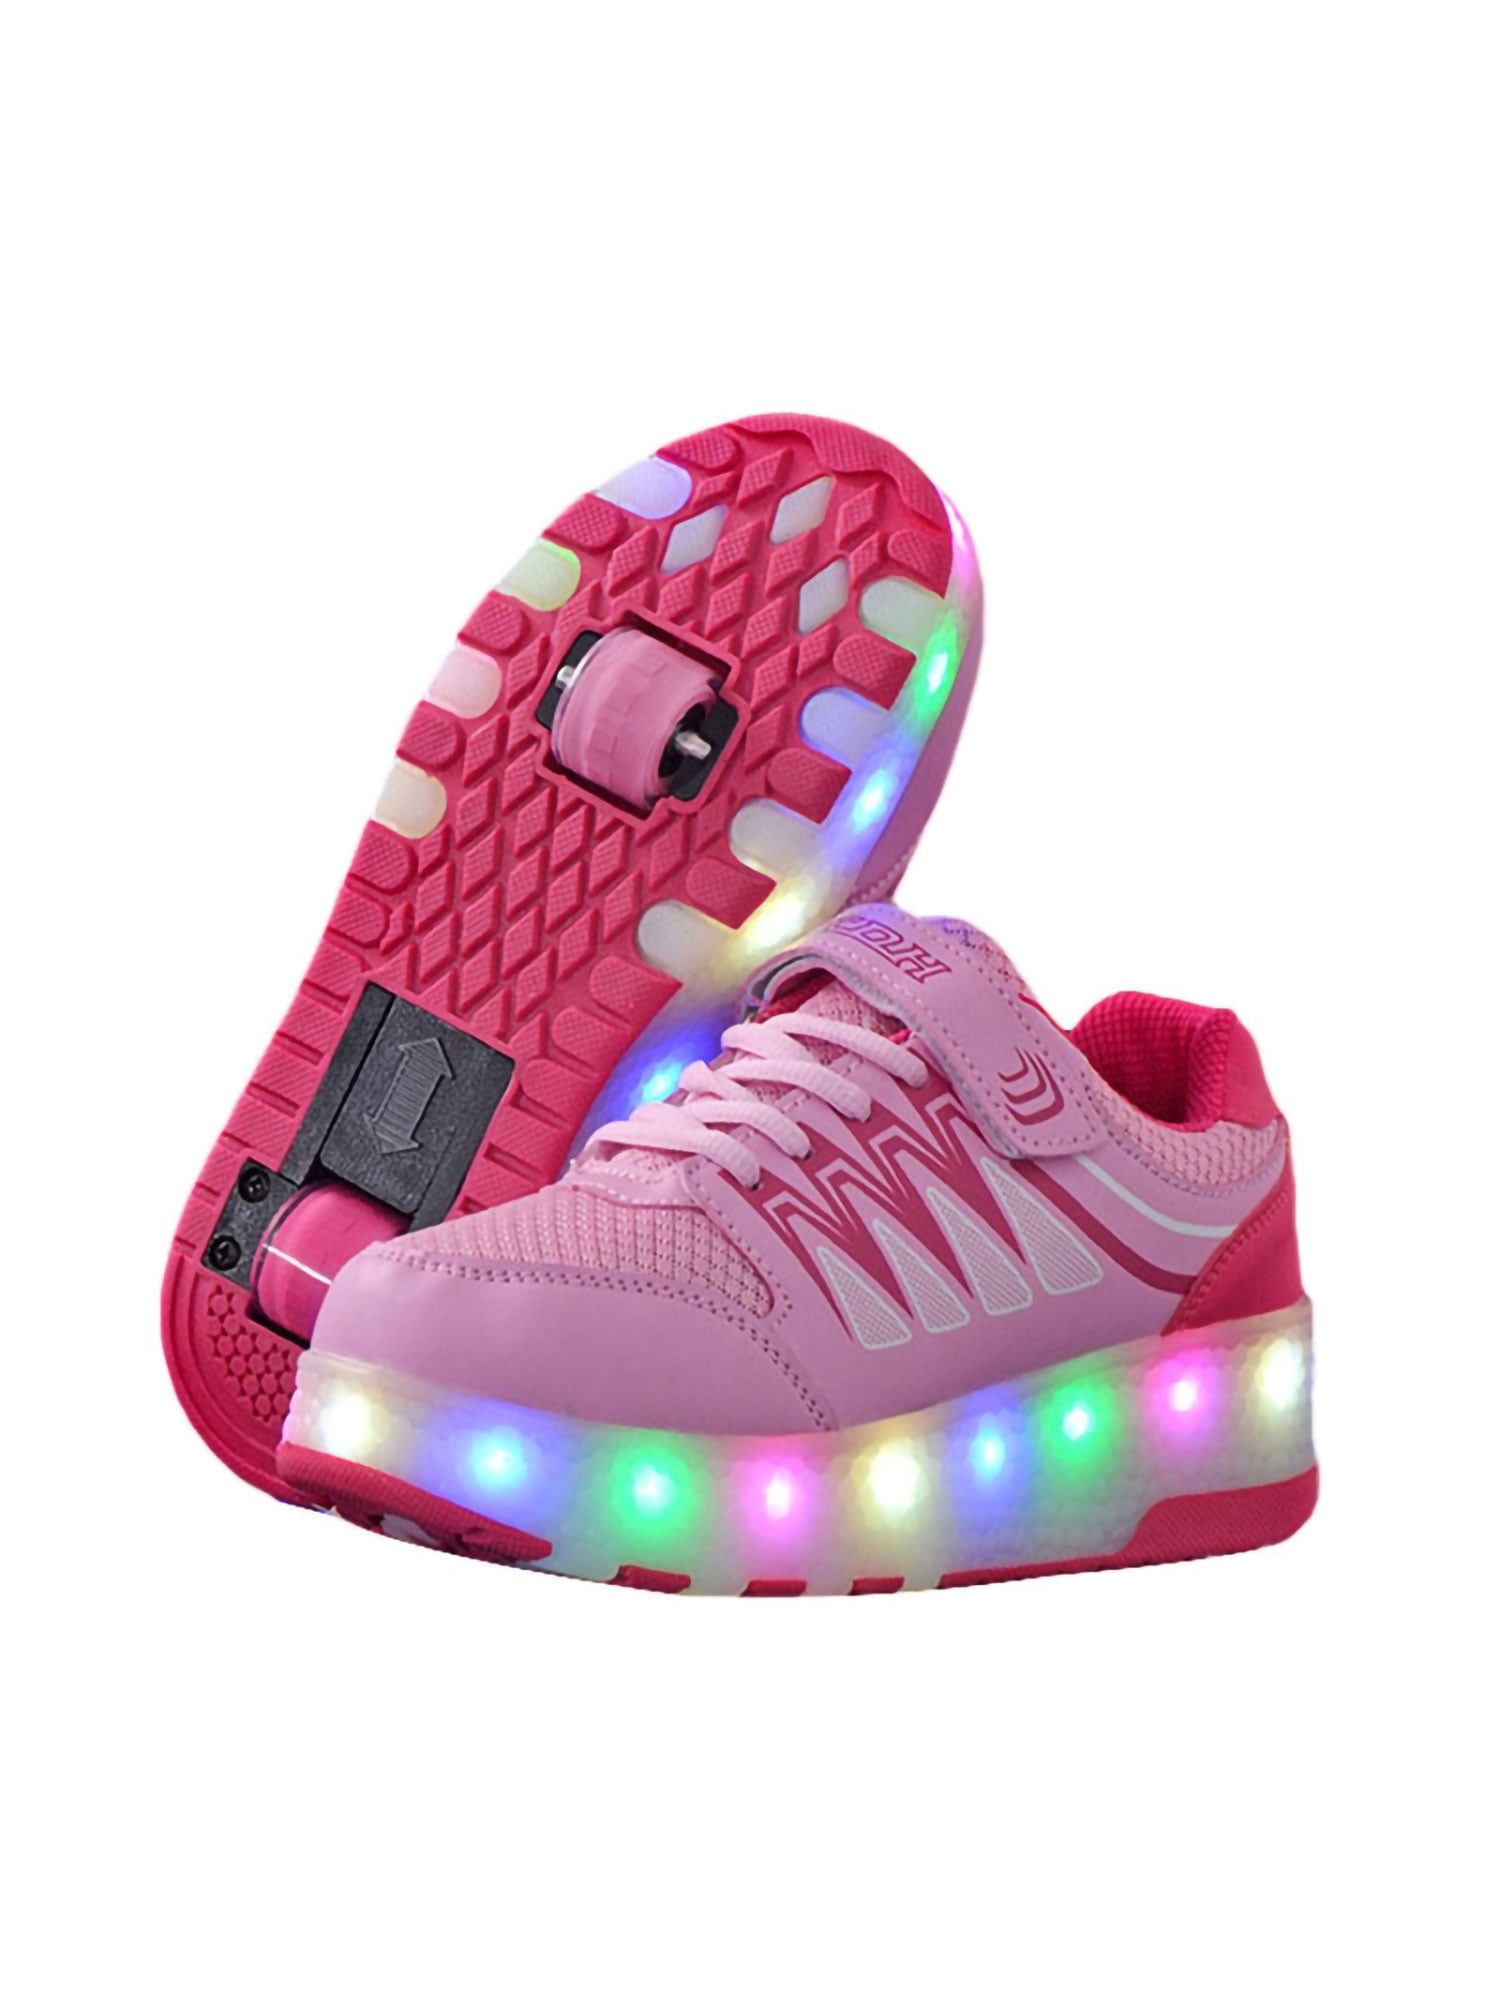 xiaoyang LED Light Up Shoes USB Charging Flashing Sneakers for Kids Boys Girls